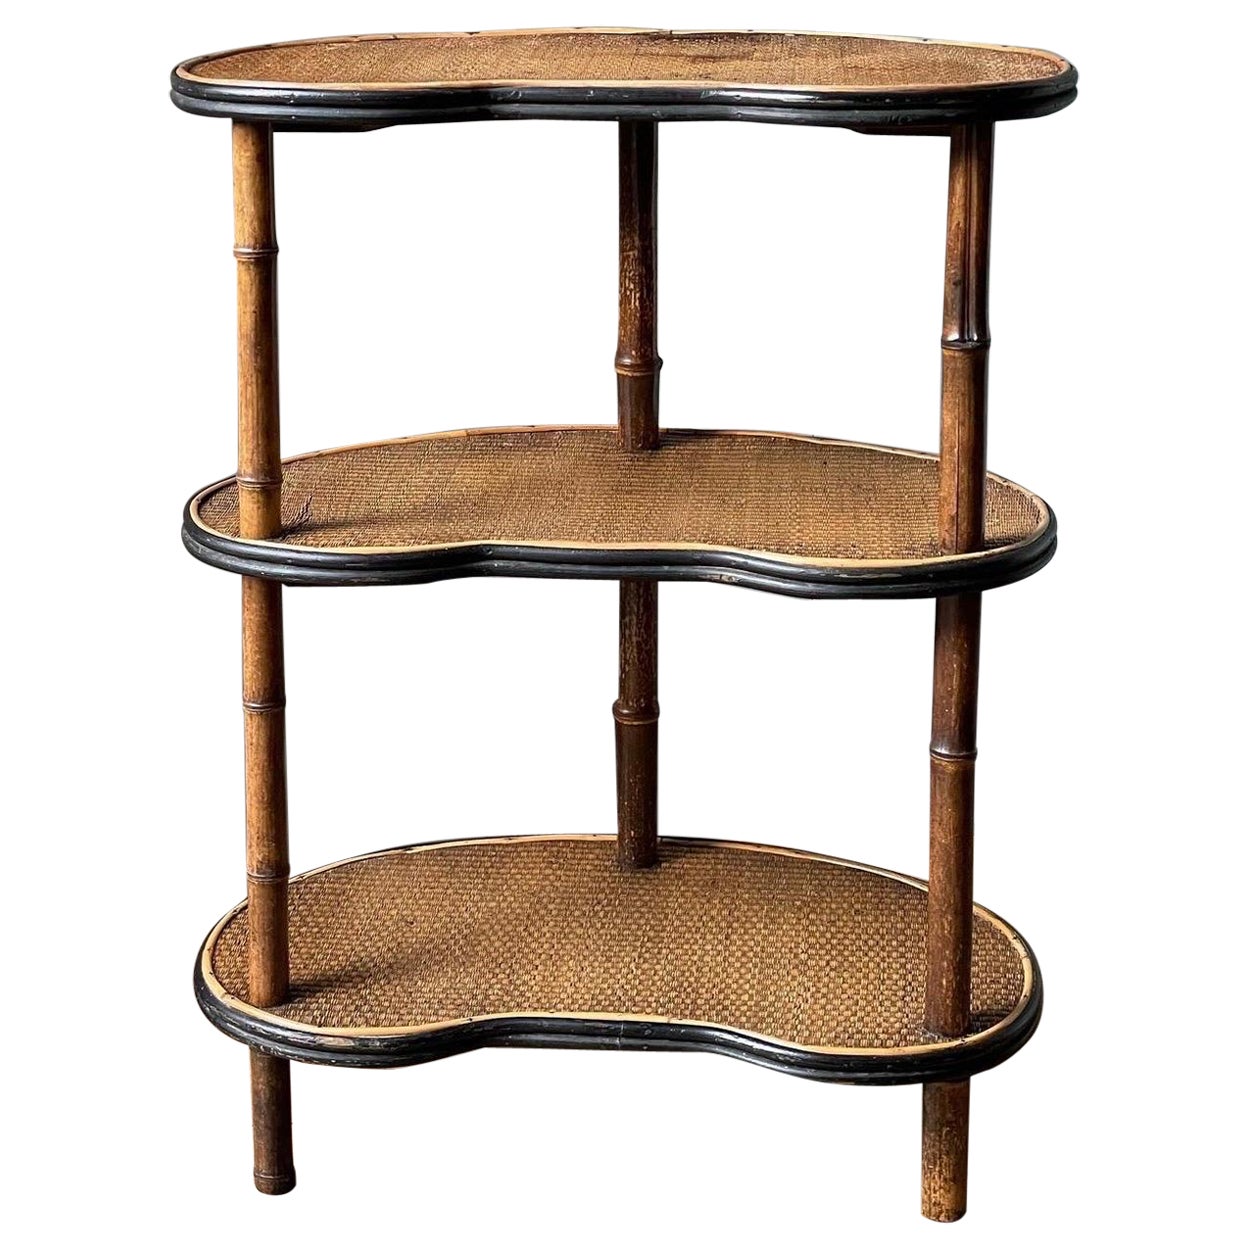 An Unusual Kidney Shaped Three Tier Bamboo Etagere For Sale